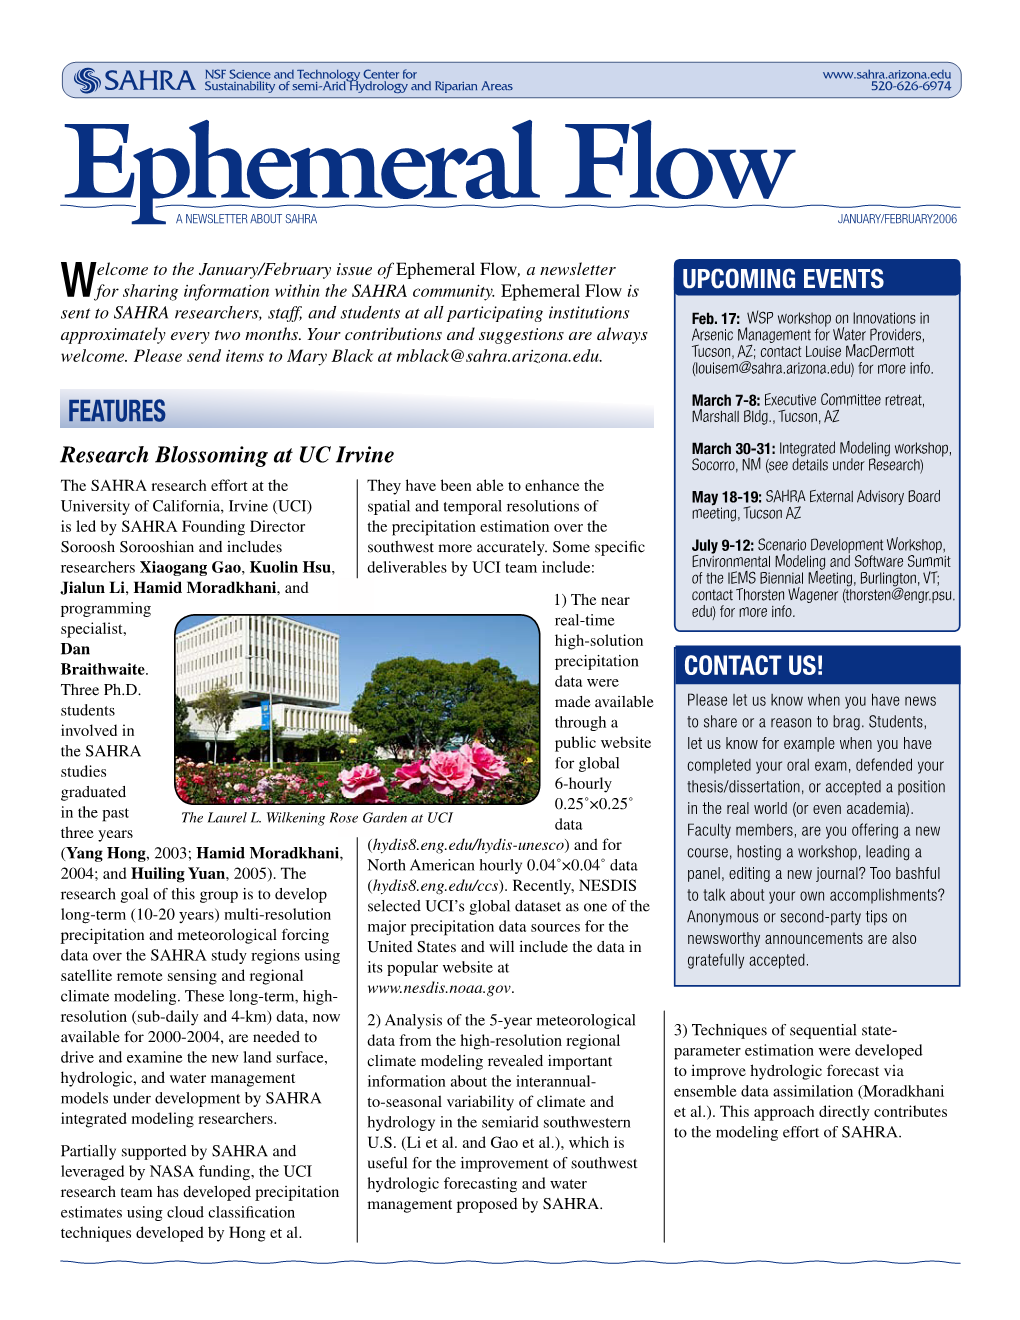 Ephemeral Flow, a Newsletter UPCOMING EVENTS W for Sharing Information Within the SAHRA Community